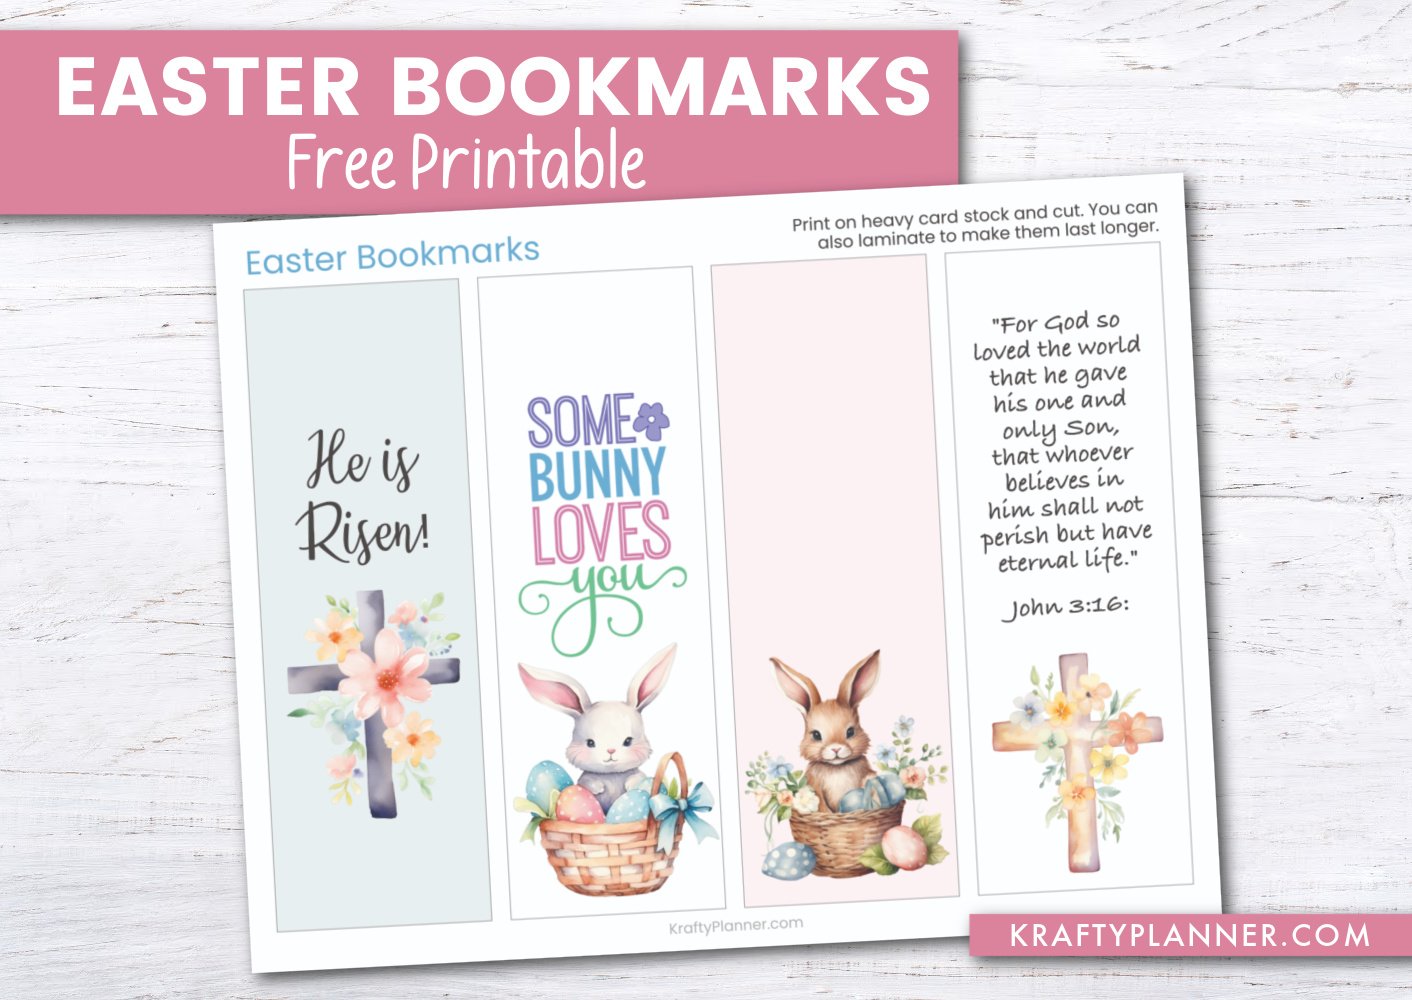 Spring Into Reading: Download Your Free Printable Easter Bookmarks Today!